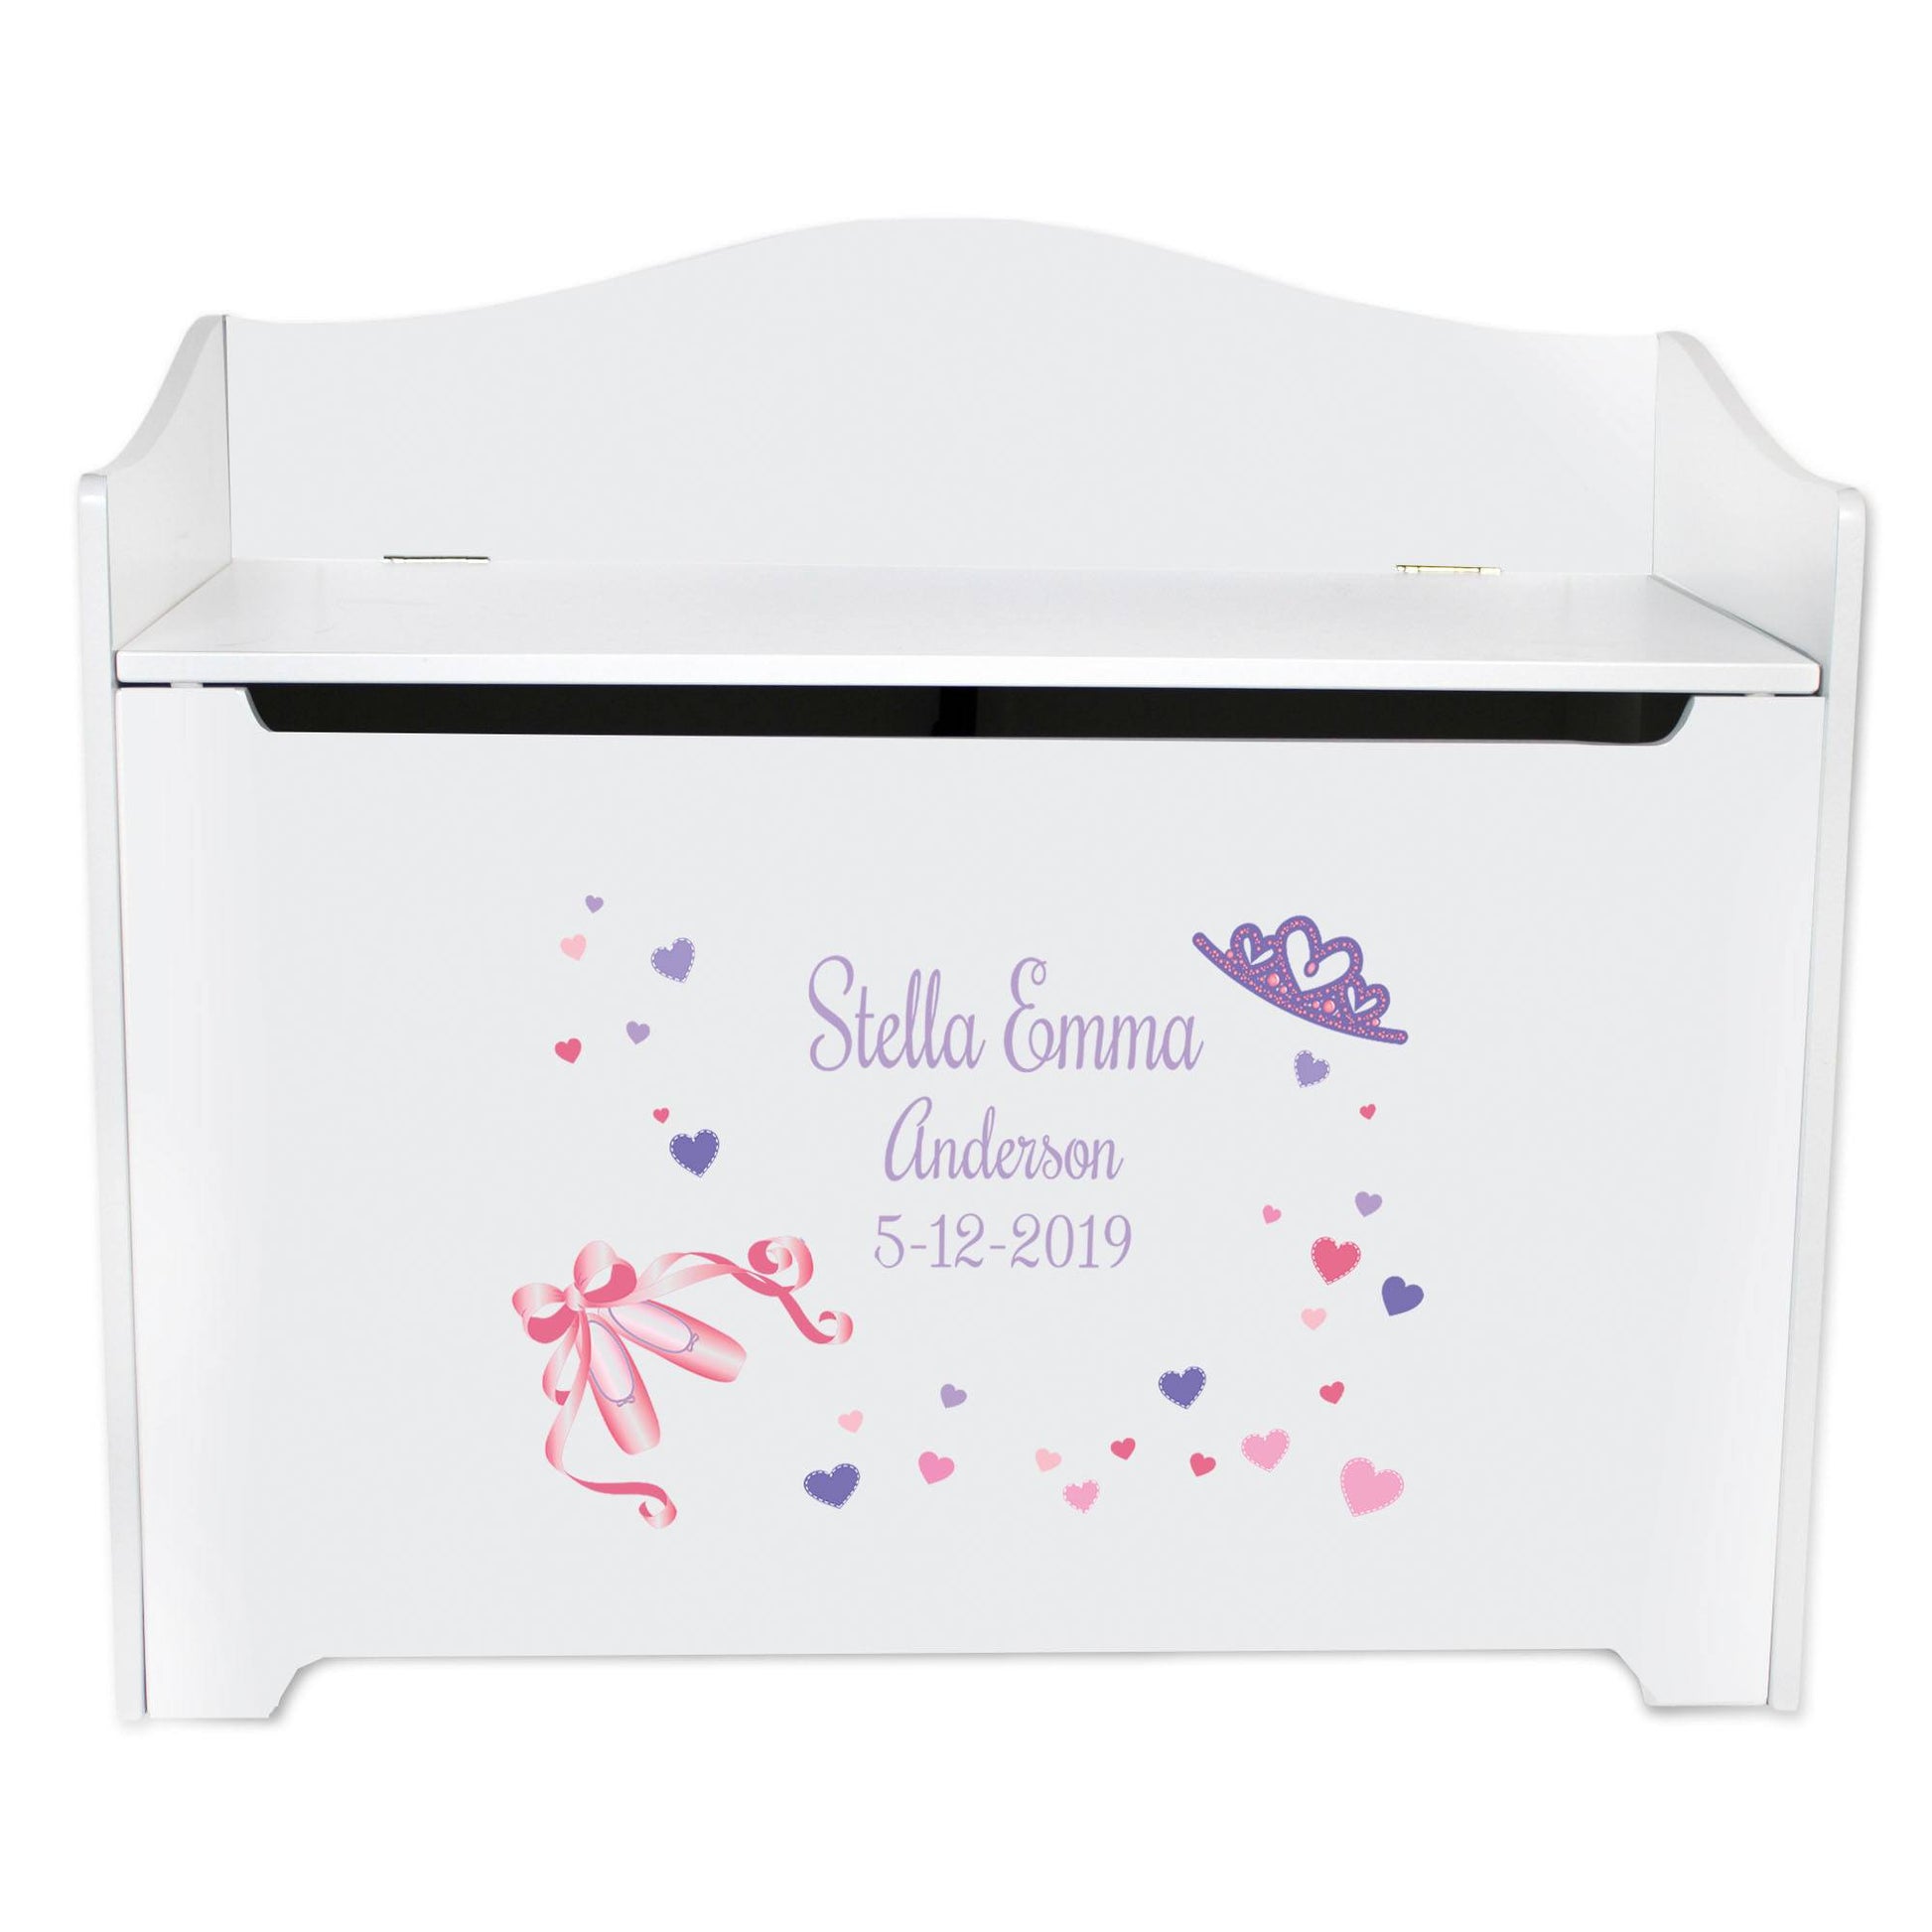 White Wooden Toy Box Bench with Ballet Princess design